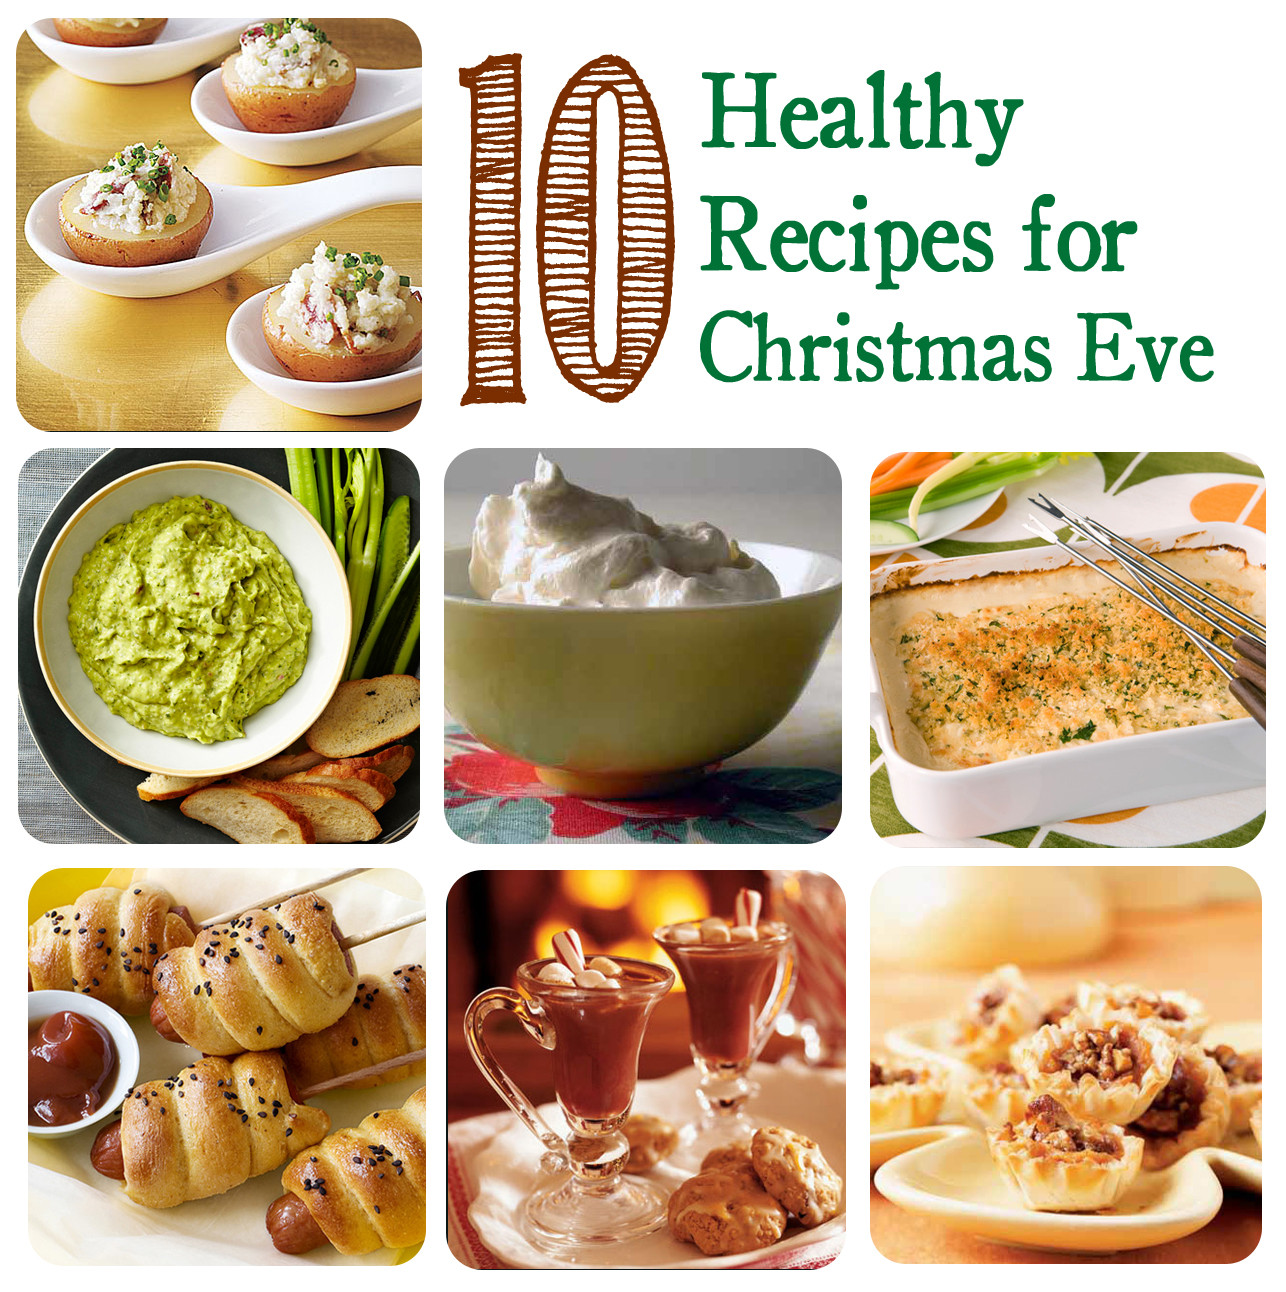 Christmas Appetizers Ideas
 My Inspired Home Christmas Eve Healthy Appetizers